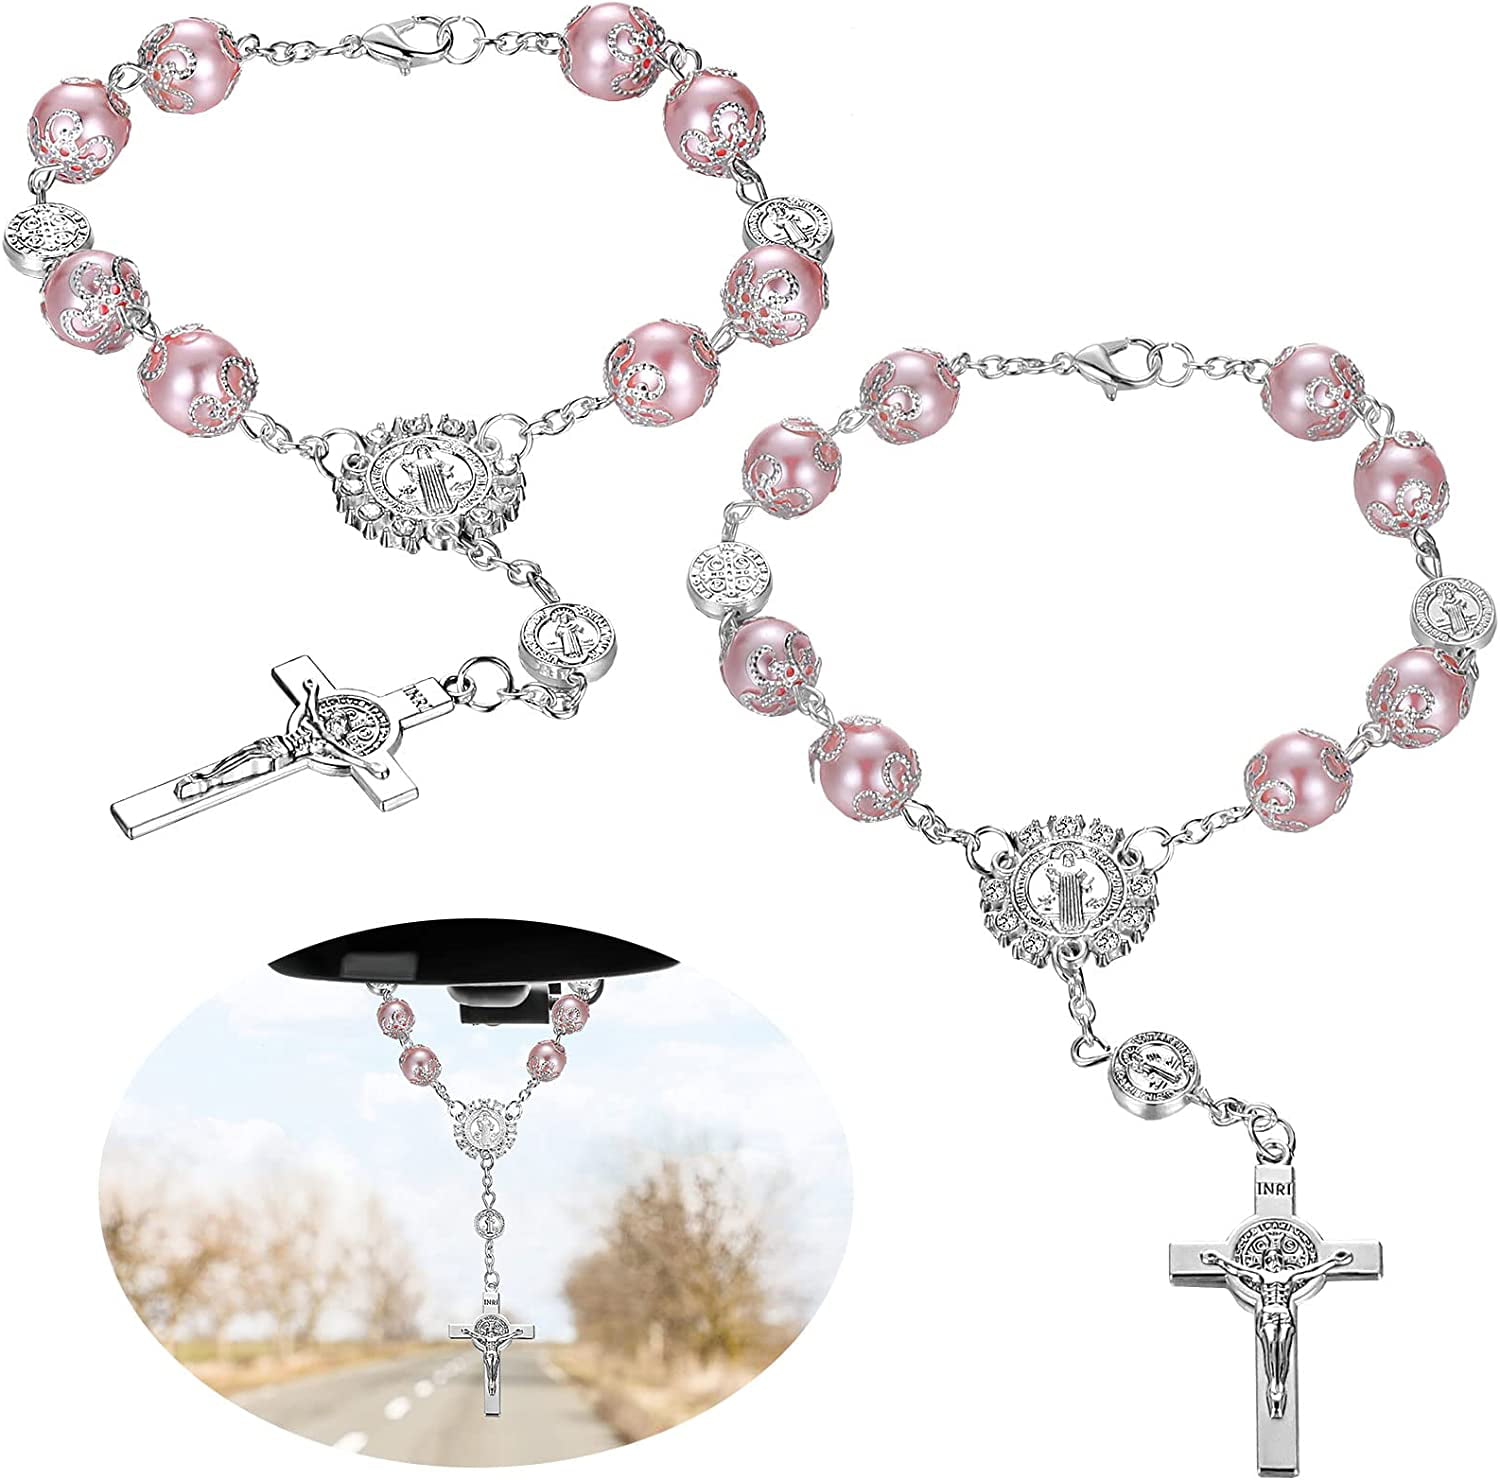 Saint Benedict Evil Protection Medal White Clear Crystal Beads Rosary Car Auto Mirror Rearview 